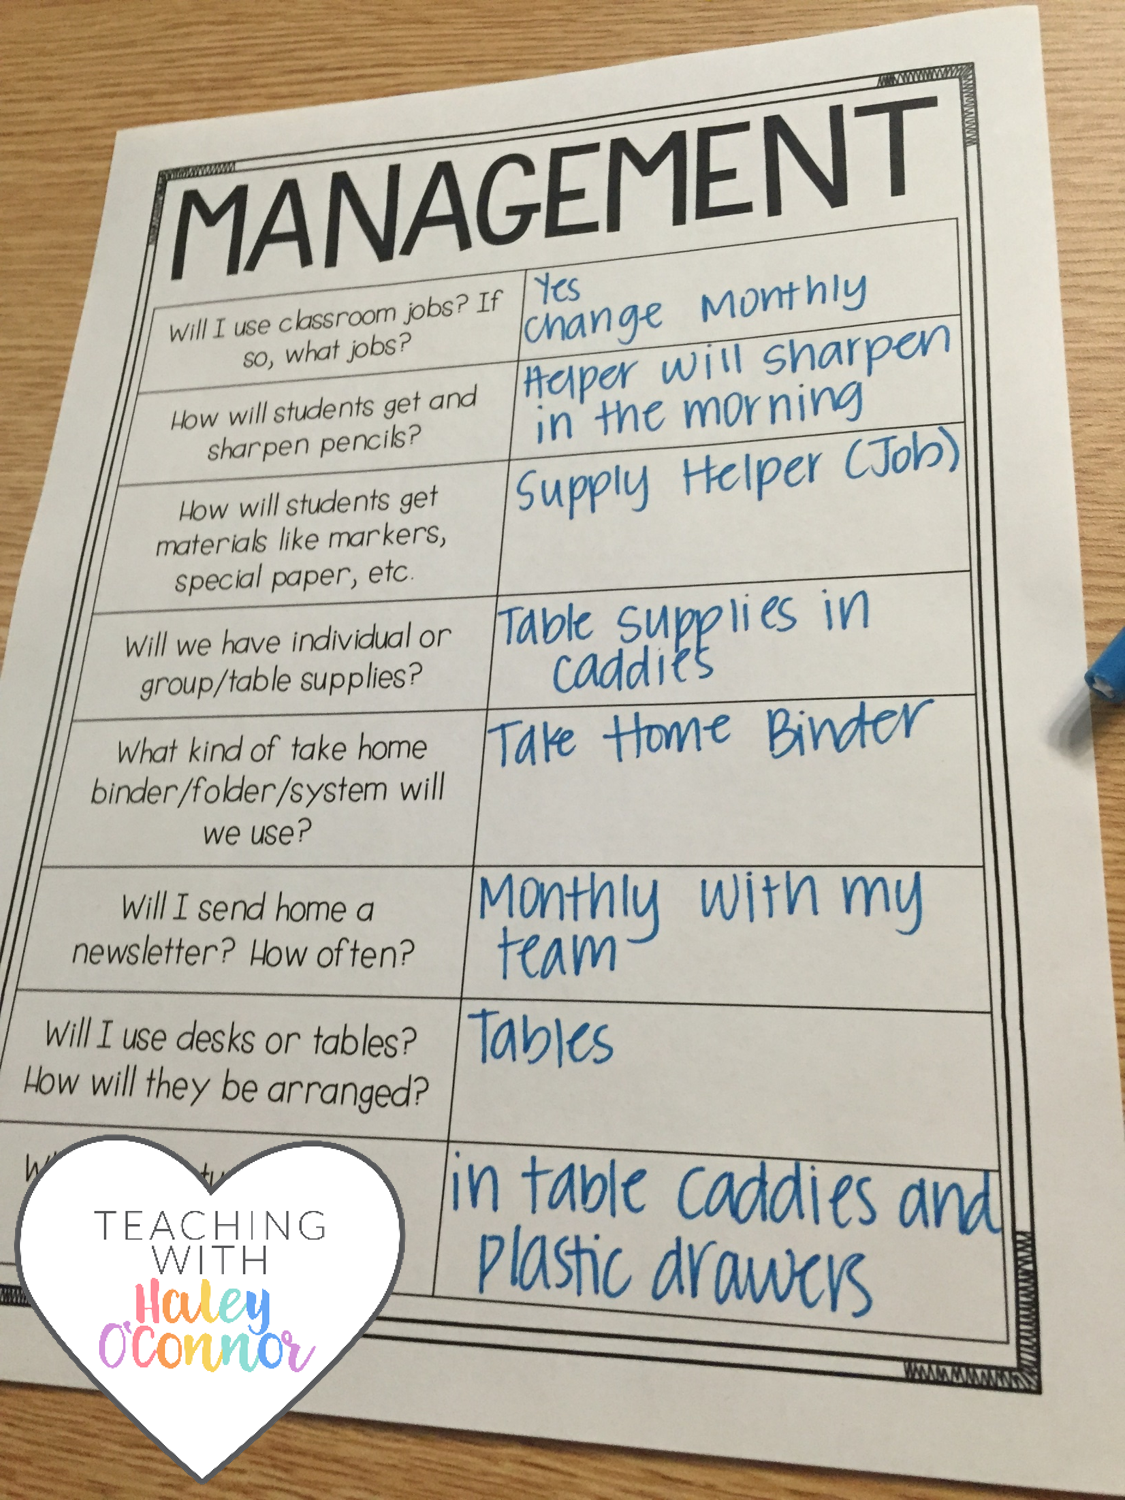 Planning Sheet for Classroom Management by Haley OConnor